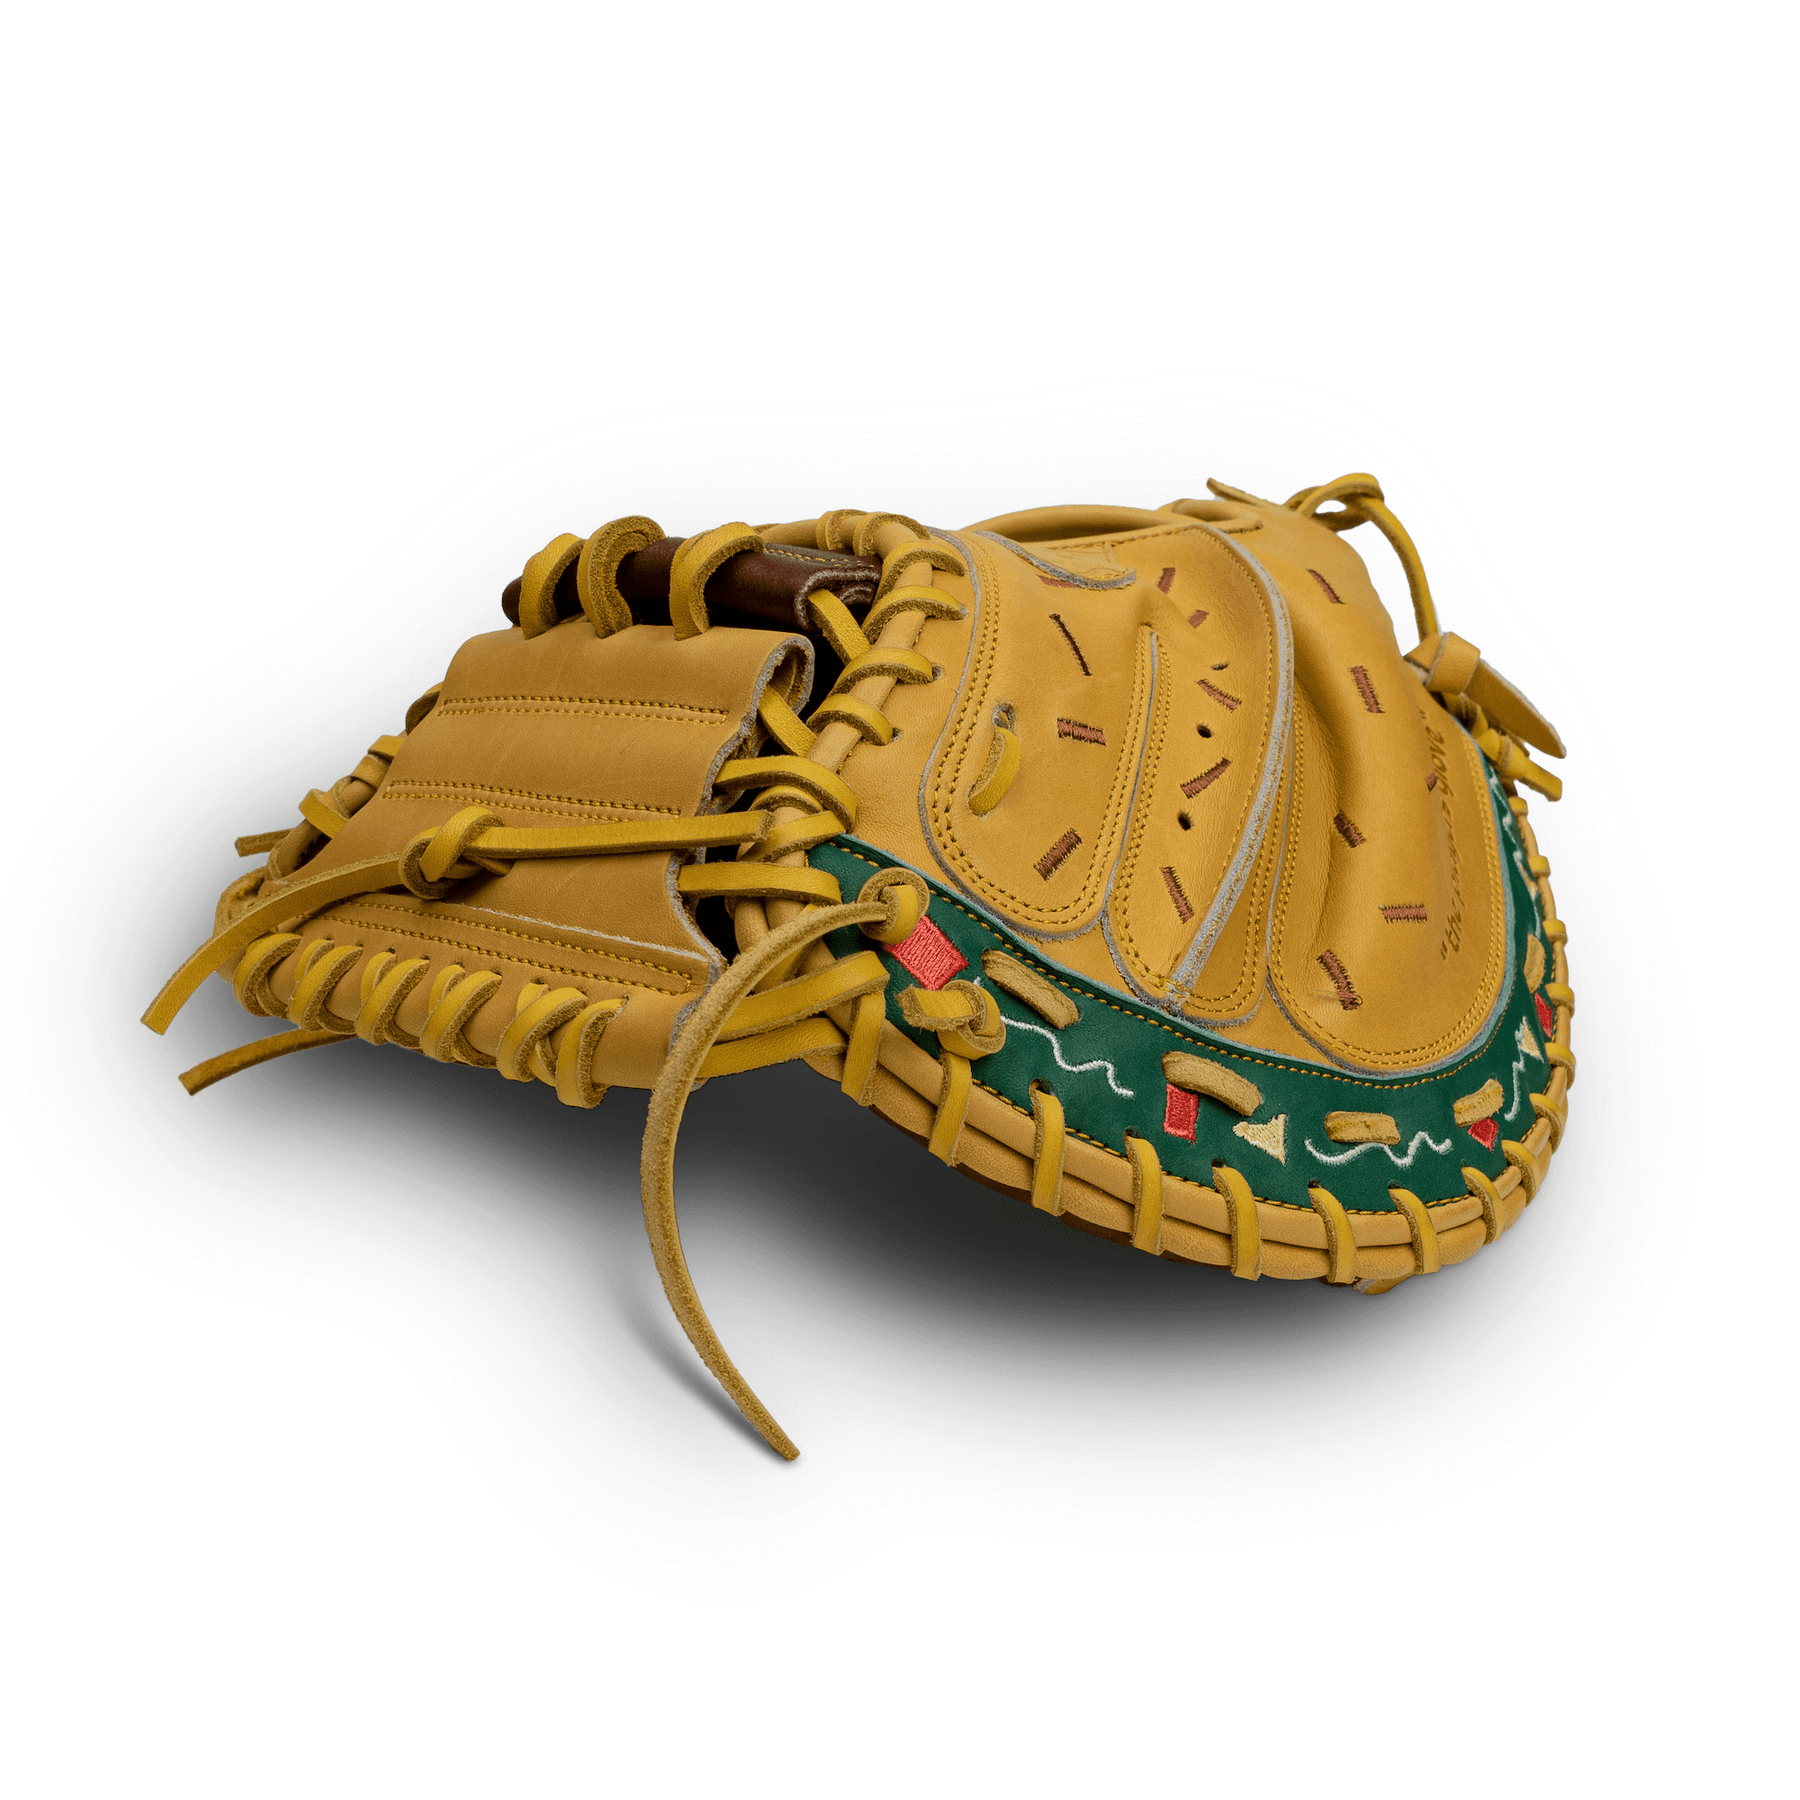 taco glove  catcher – Absolutely Ridiculous innovation for Athletes